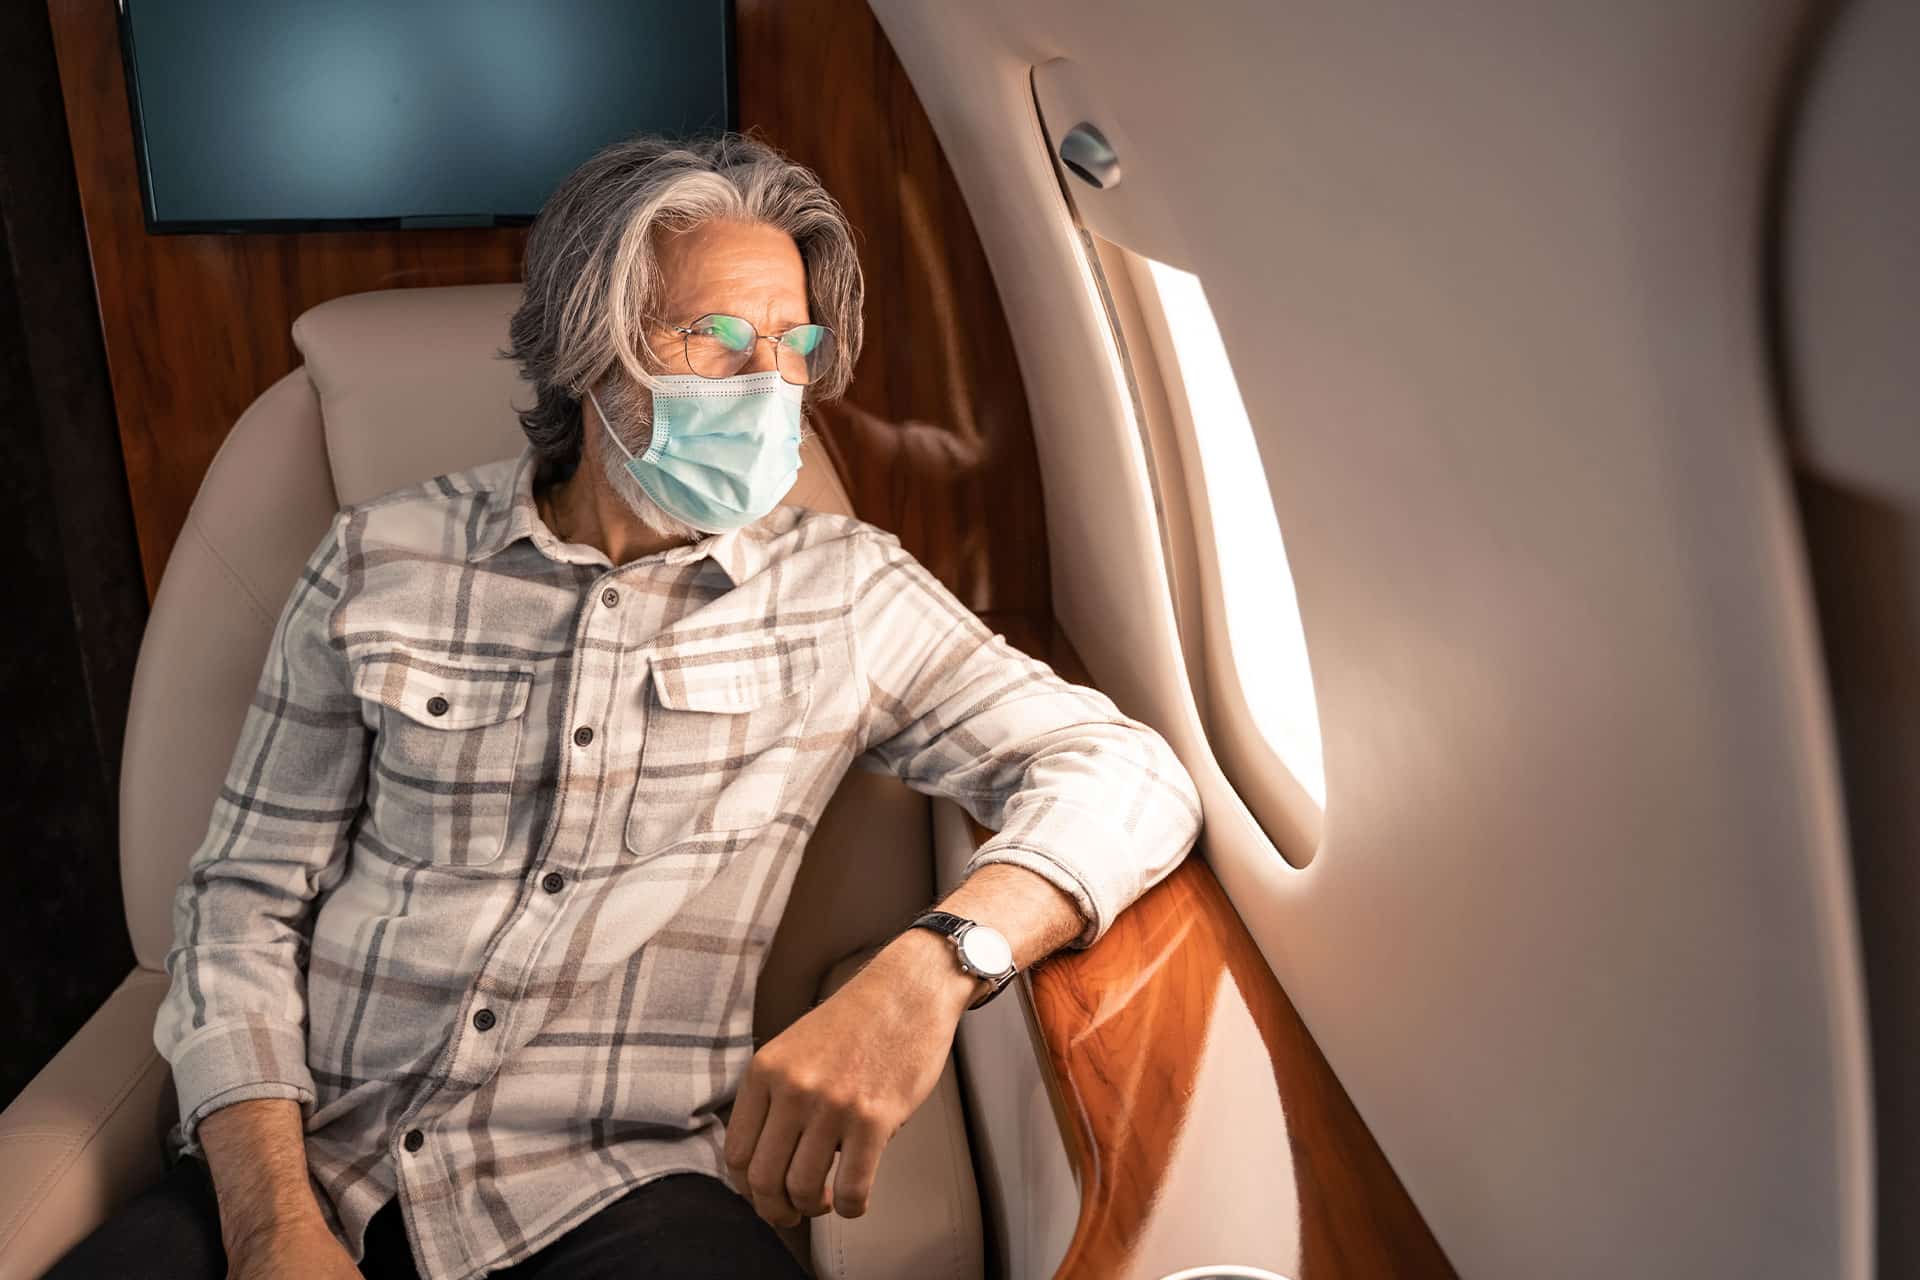 A man following COVID-19 safety protocols on a private jet